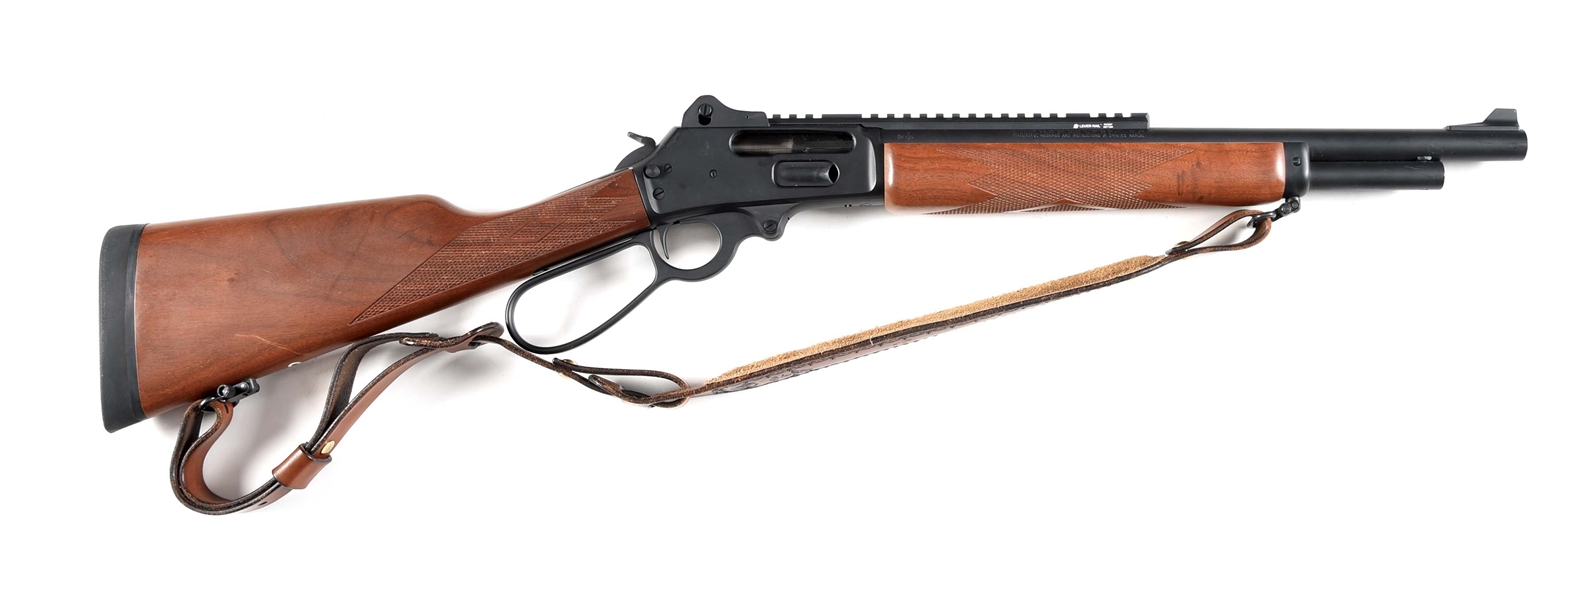 (M) MARLIN 1895G "BRUSH HAWG" LEVER ACTION RIFLE CUSTOMIZED BY GRIZZLY CUSTOM GUNS.